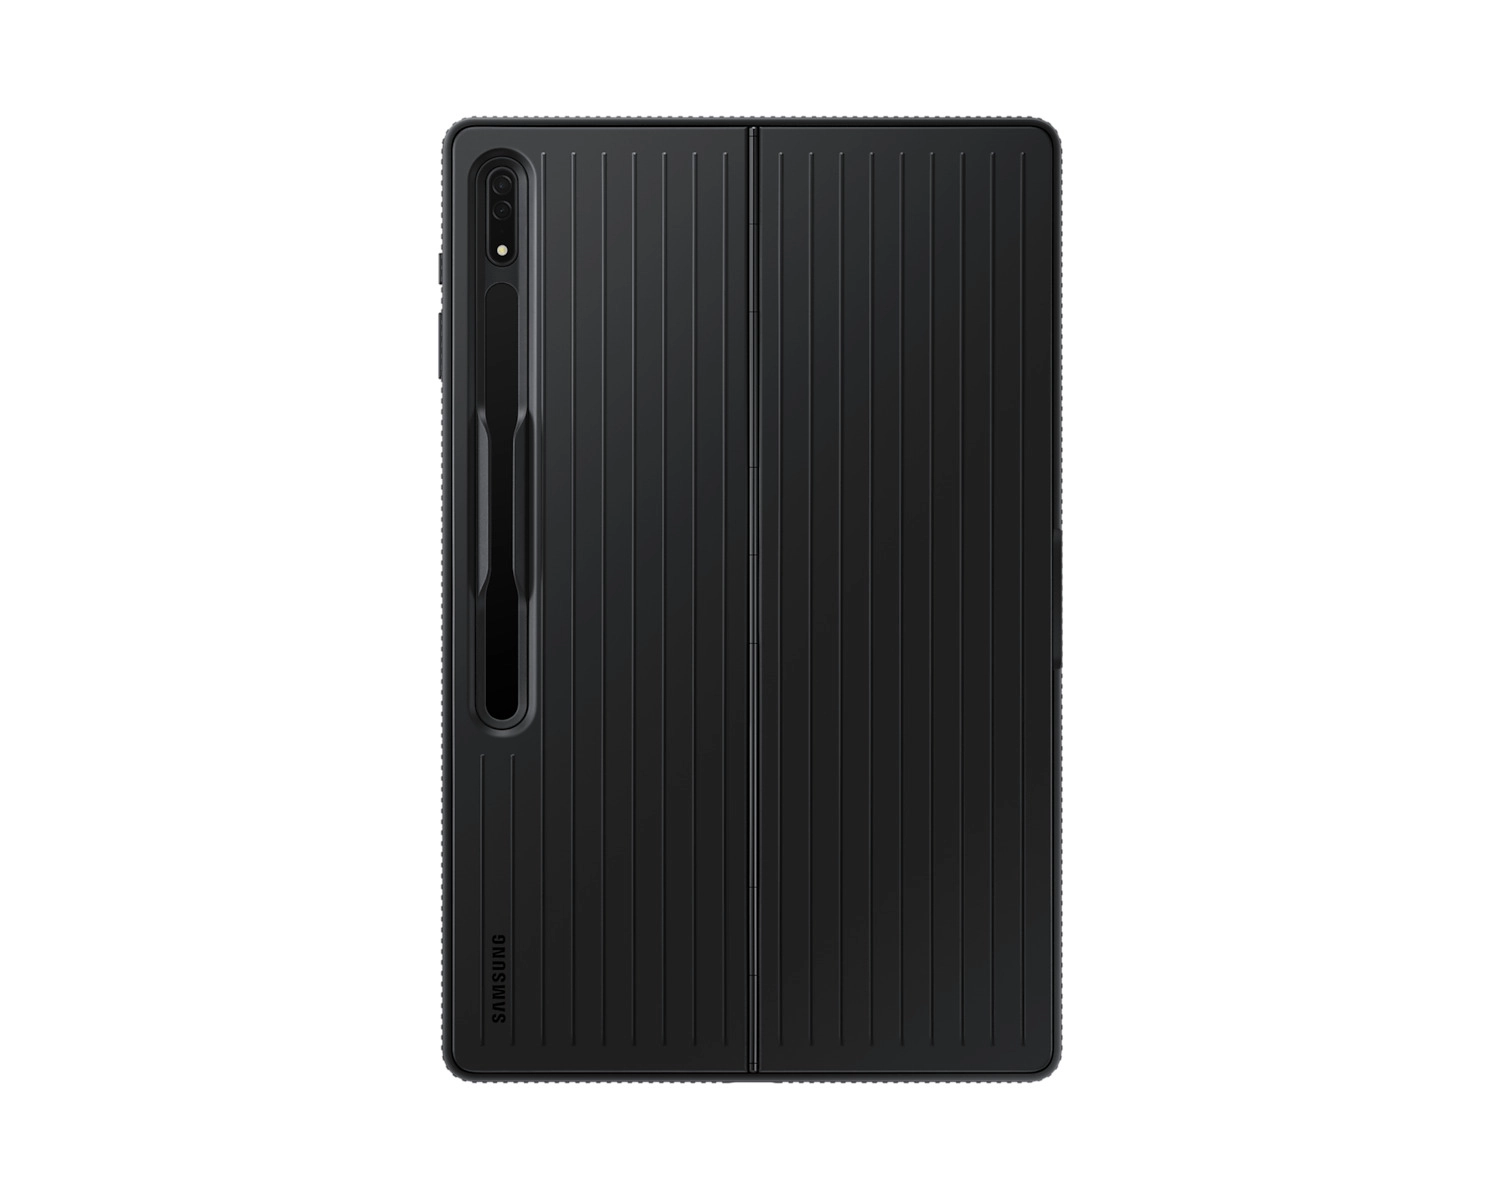 More information about "Θήκη για Galaxy Tab S8 Ultra (Samsung Protective Standing Back Cover)"